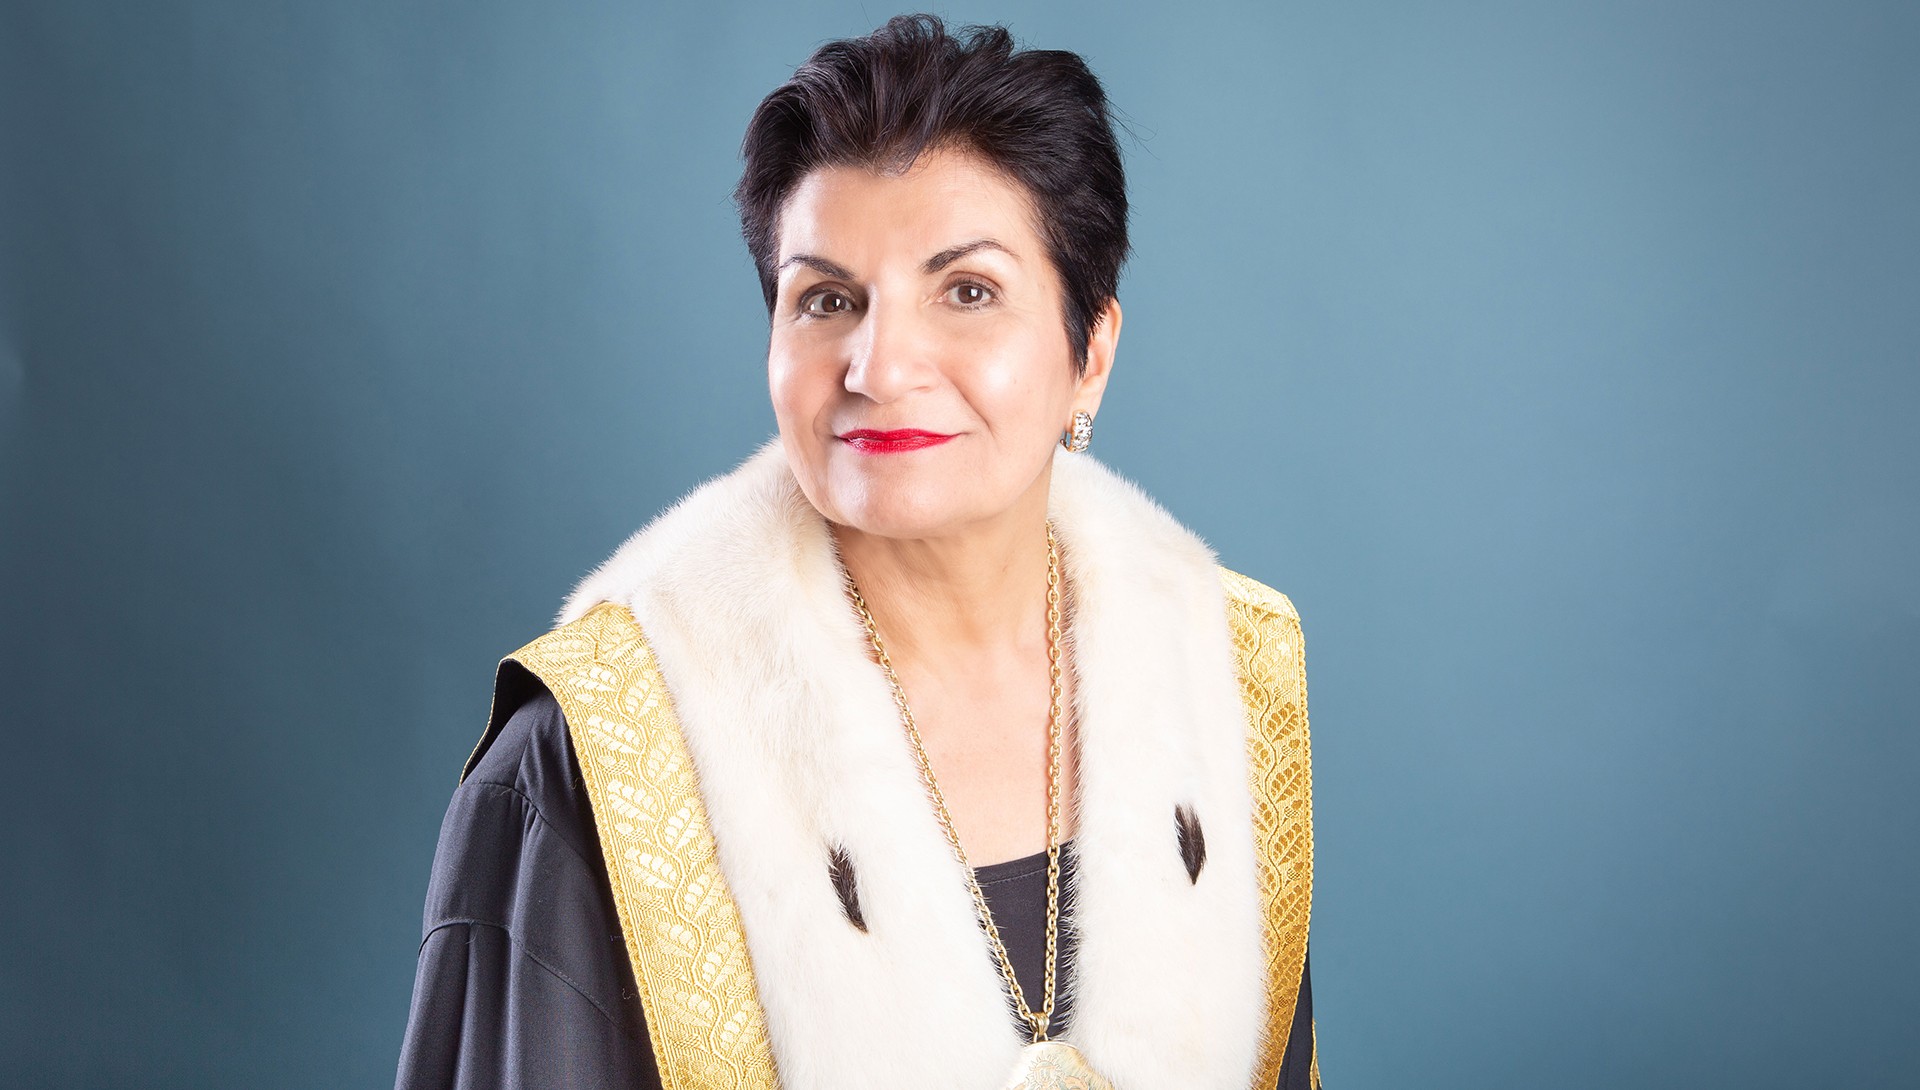  A person with short dark hair wearing a dark robe with gold embroidery and white fur trim, a gold necklace, and red lipstick, posing against a teal background.